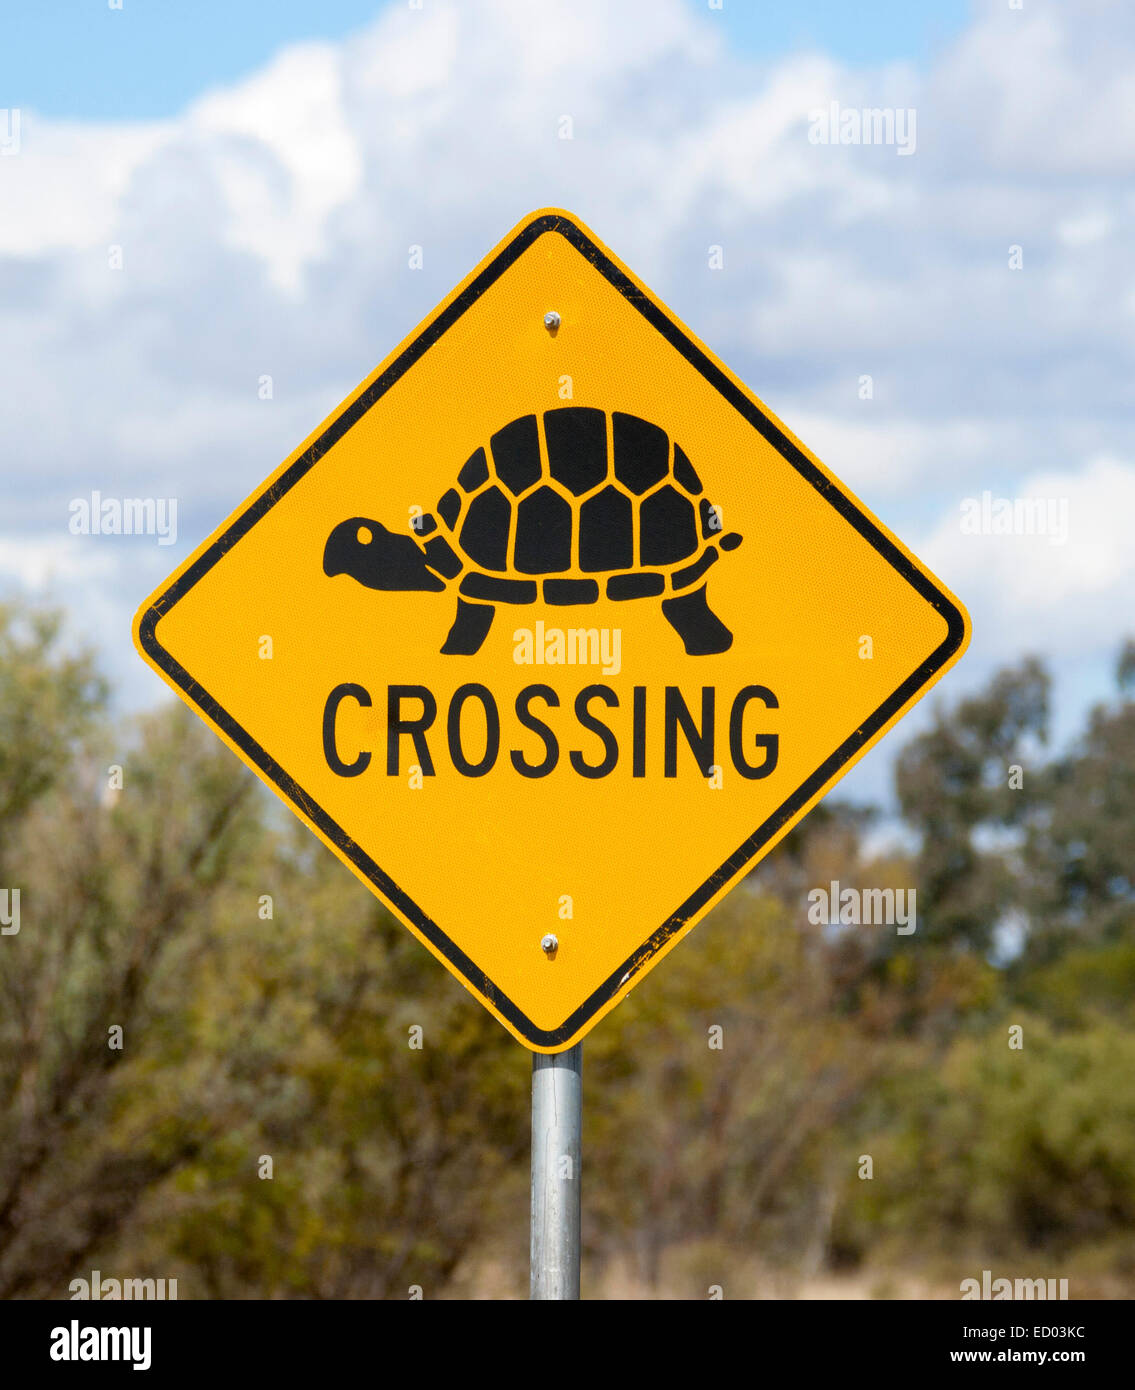 Unusual road sign in Australian outback, yellow background with black design & text warning of tortoises / turtles crossing road Stock Photo